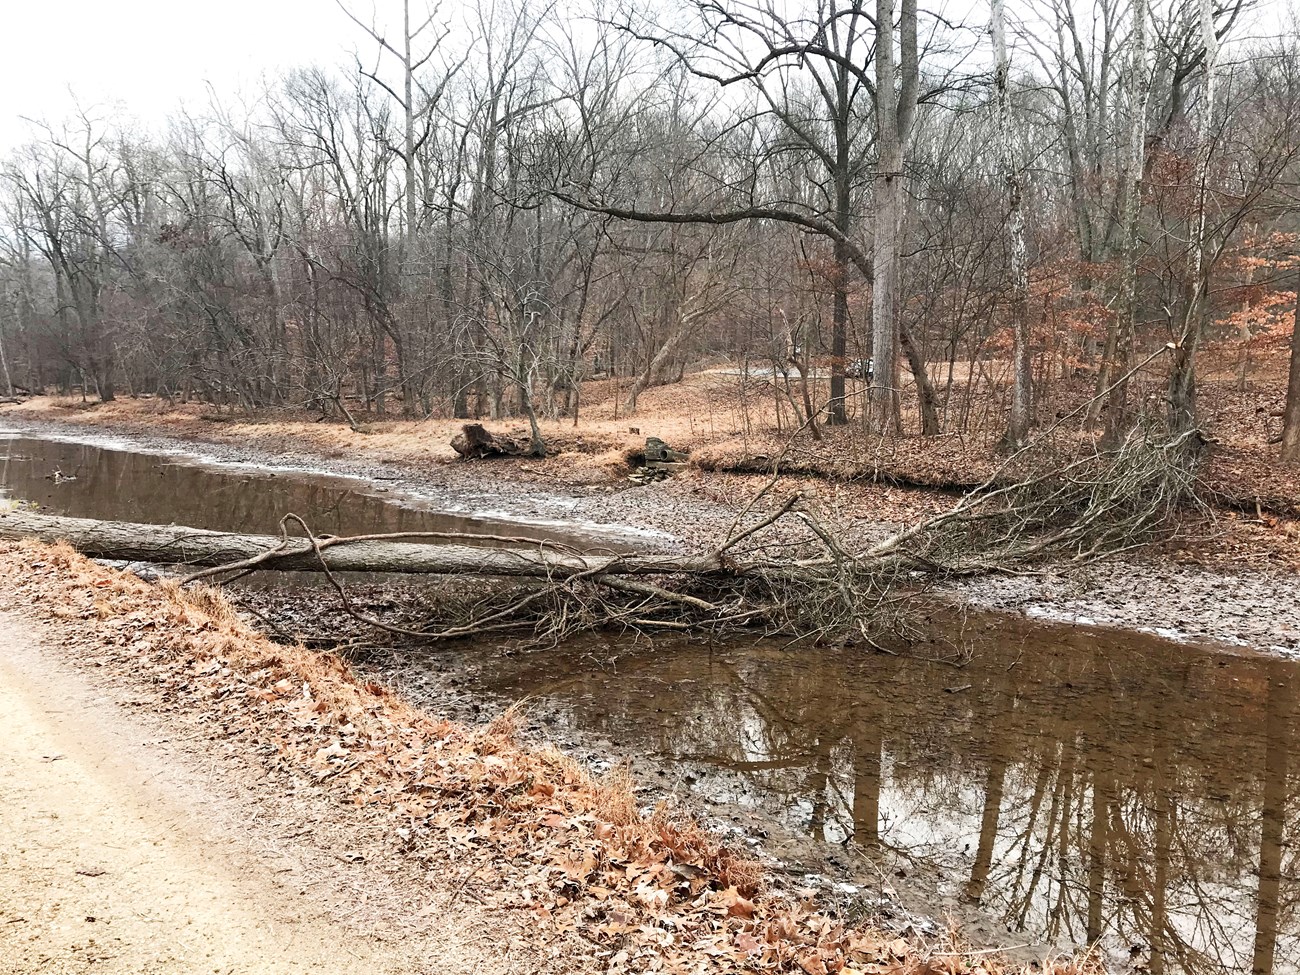 A downed tree spans across a canal with very little water in it